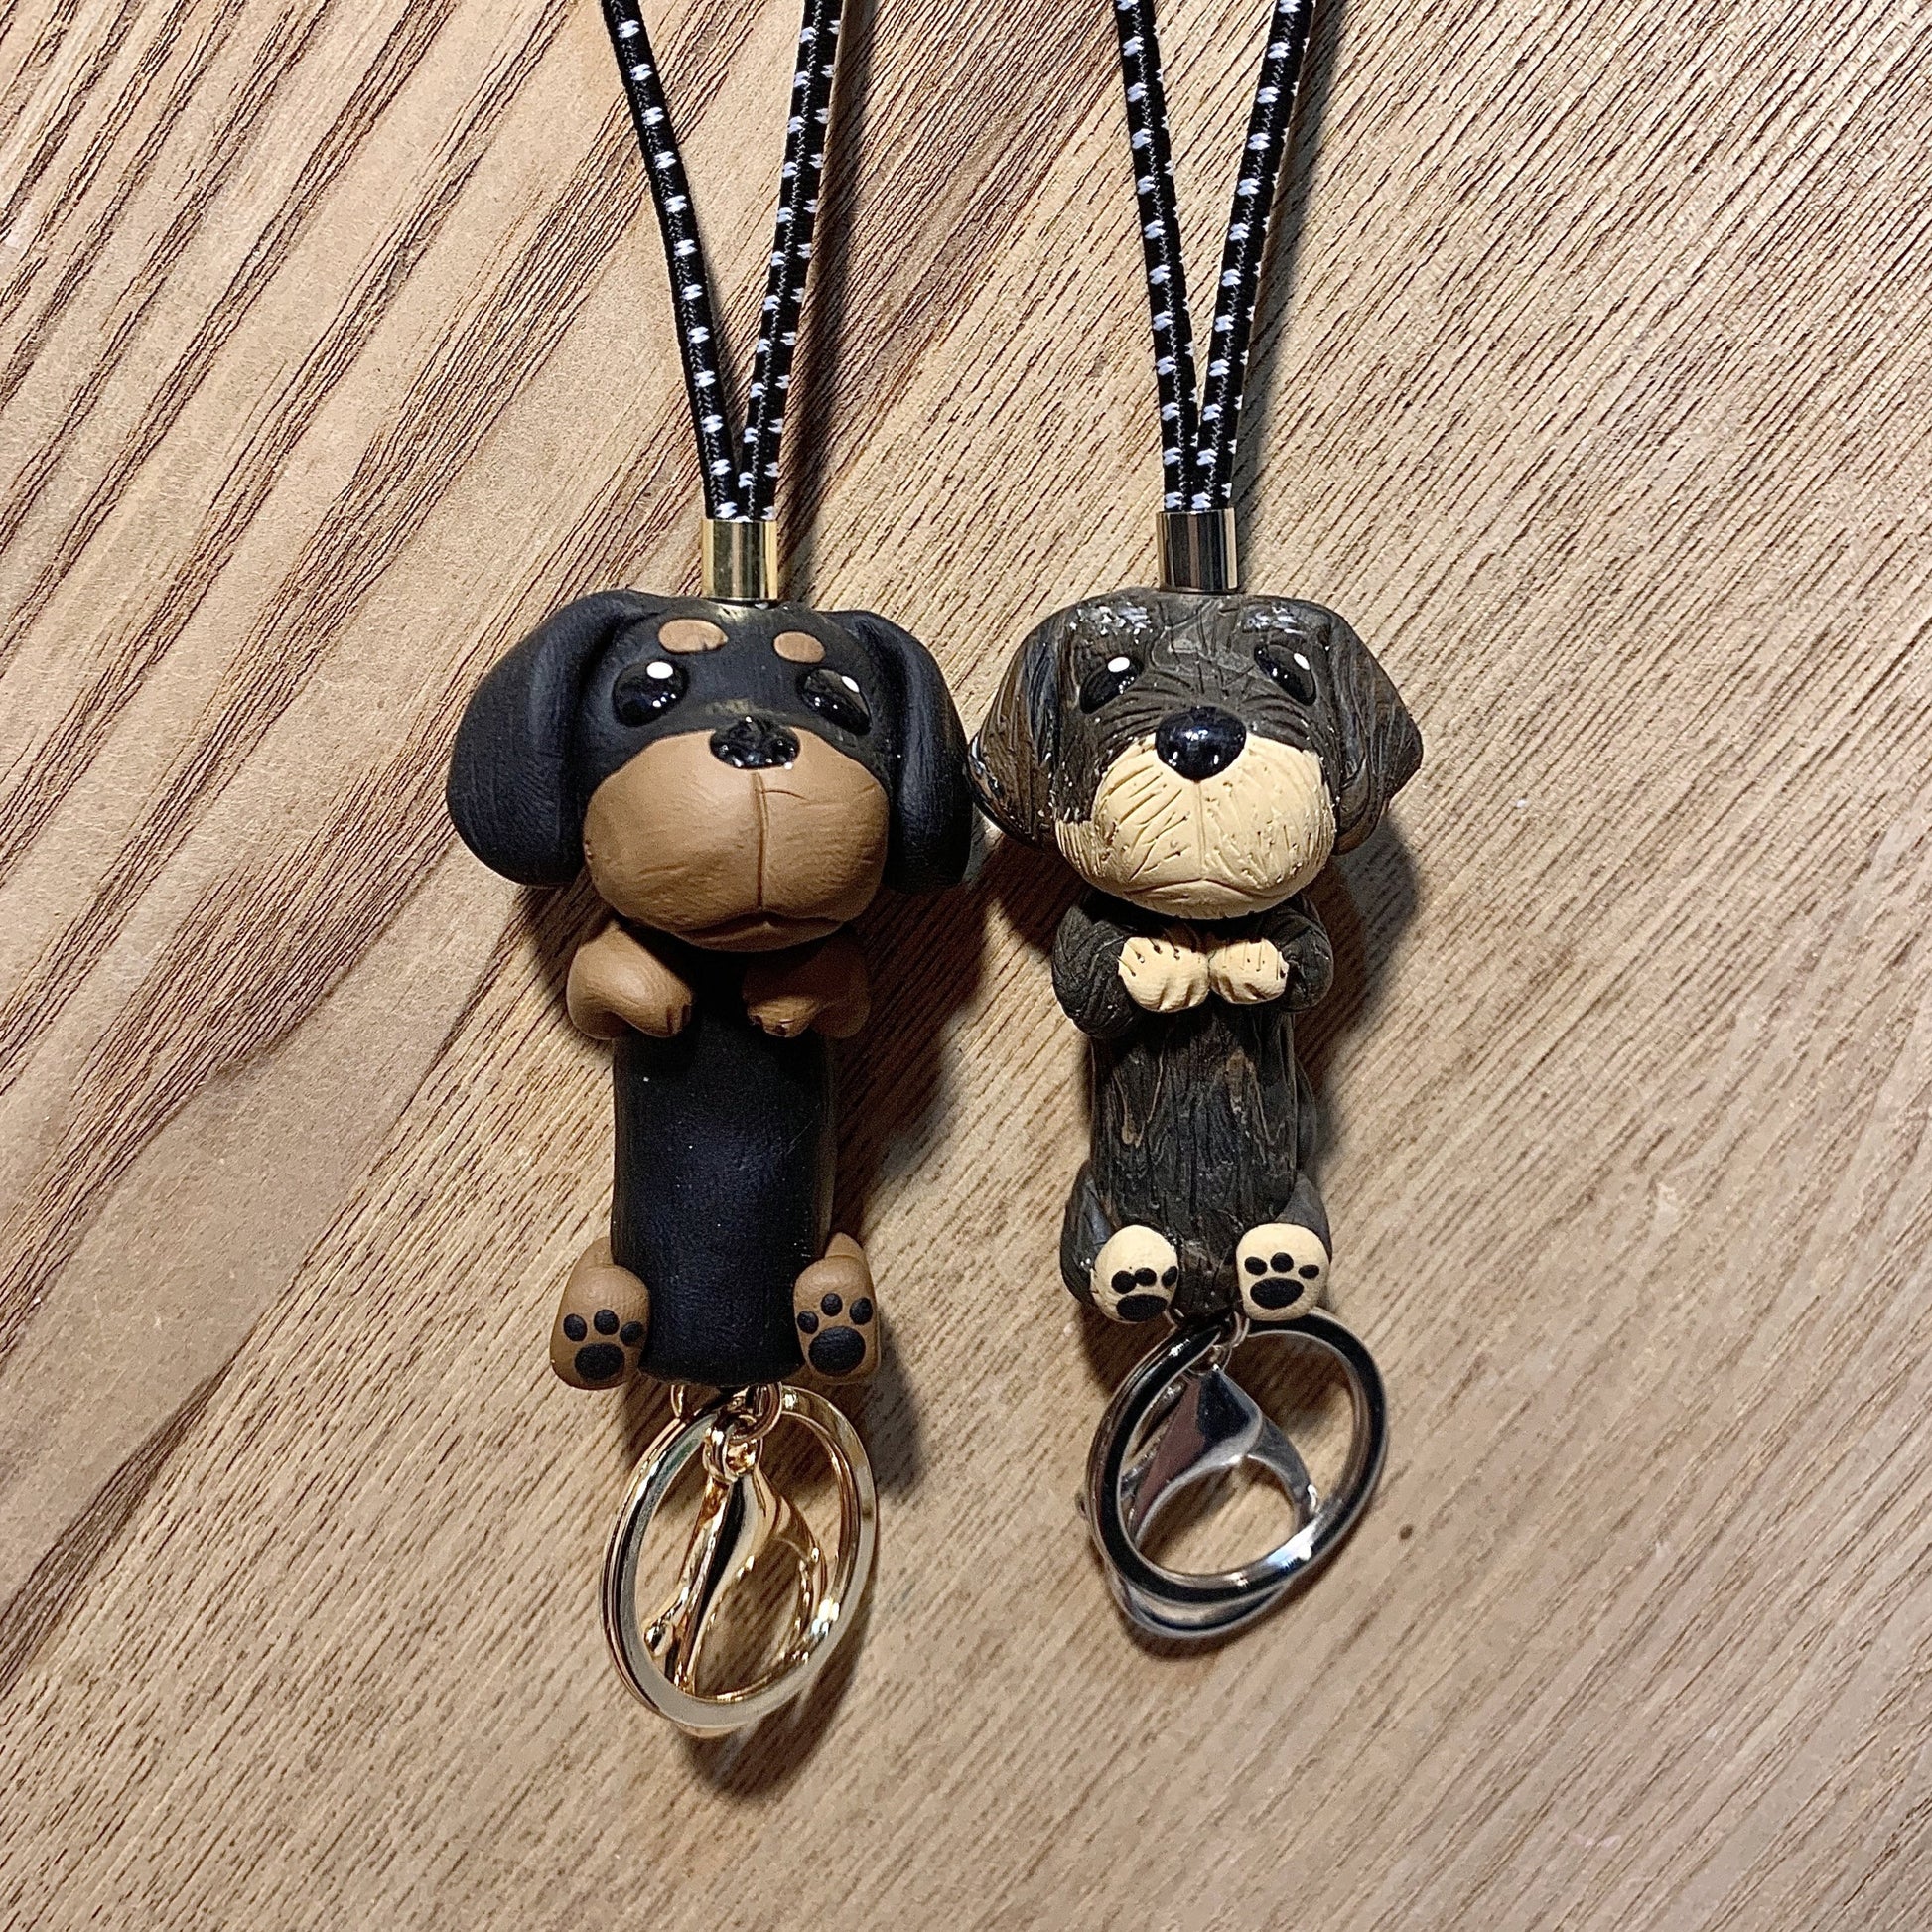 sausage dog lanyards can also be made into keychains, polymer clay animals